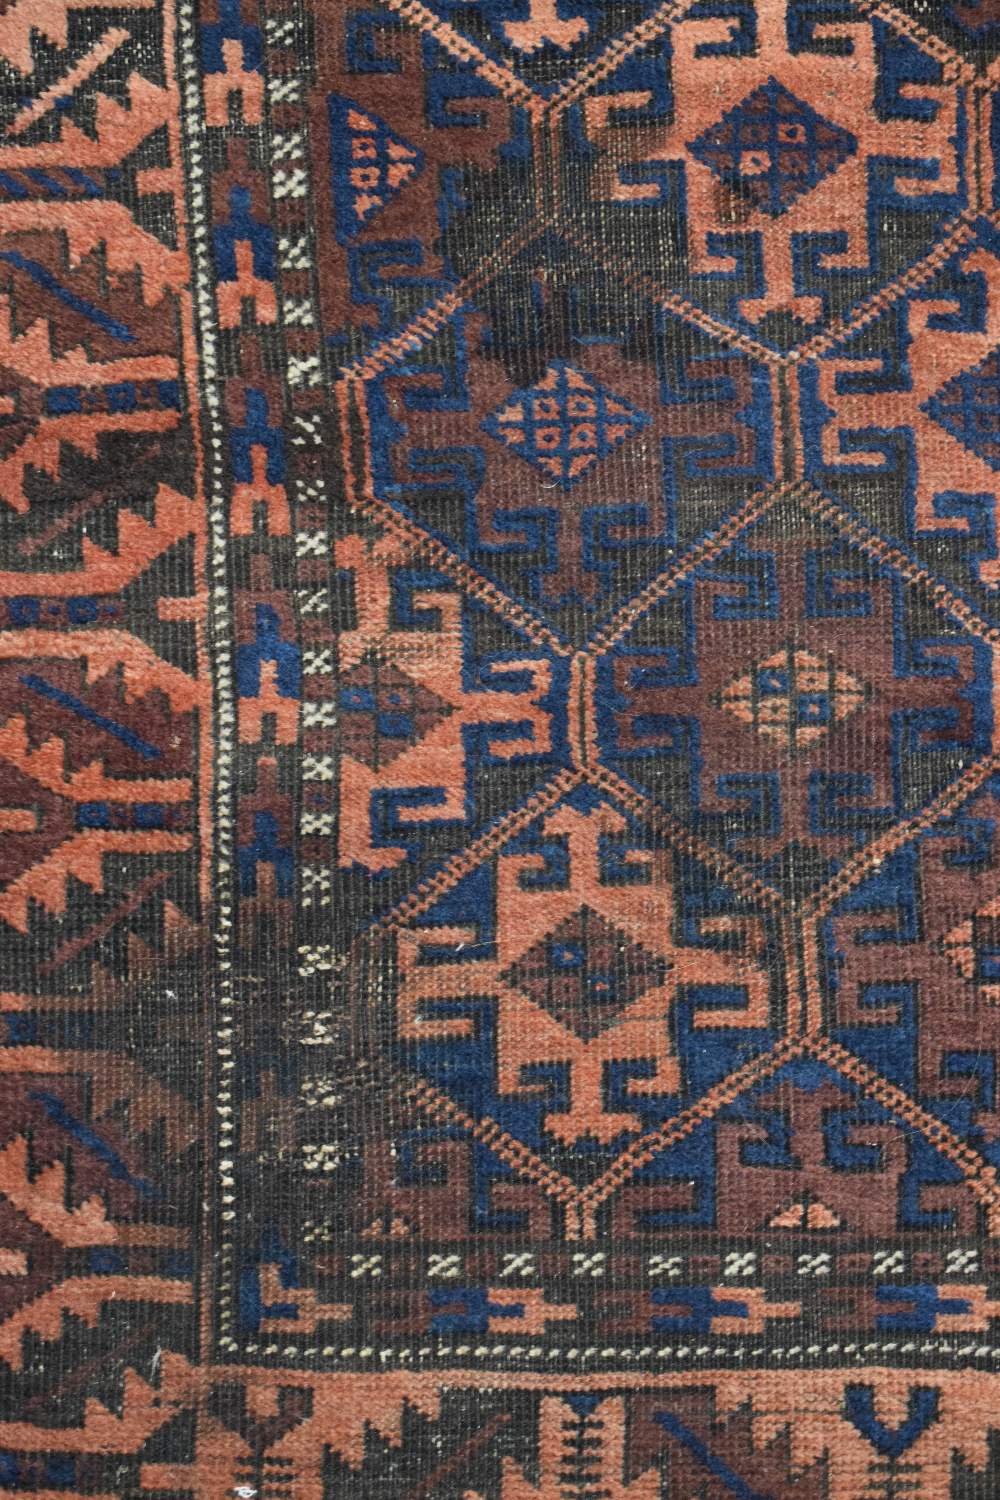 Baluchi rug, Khorasan, north east Persia, early 20th century, 4ft. 10in. x 2ft. 10in. 1.47m. x 0. - Image 8 of 10